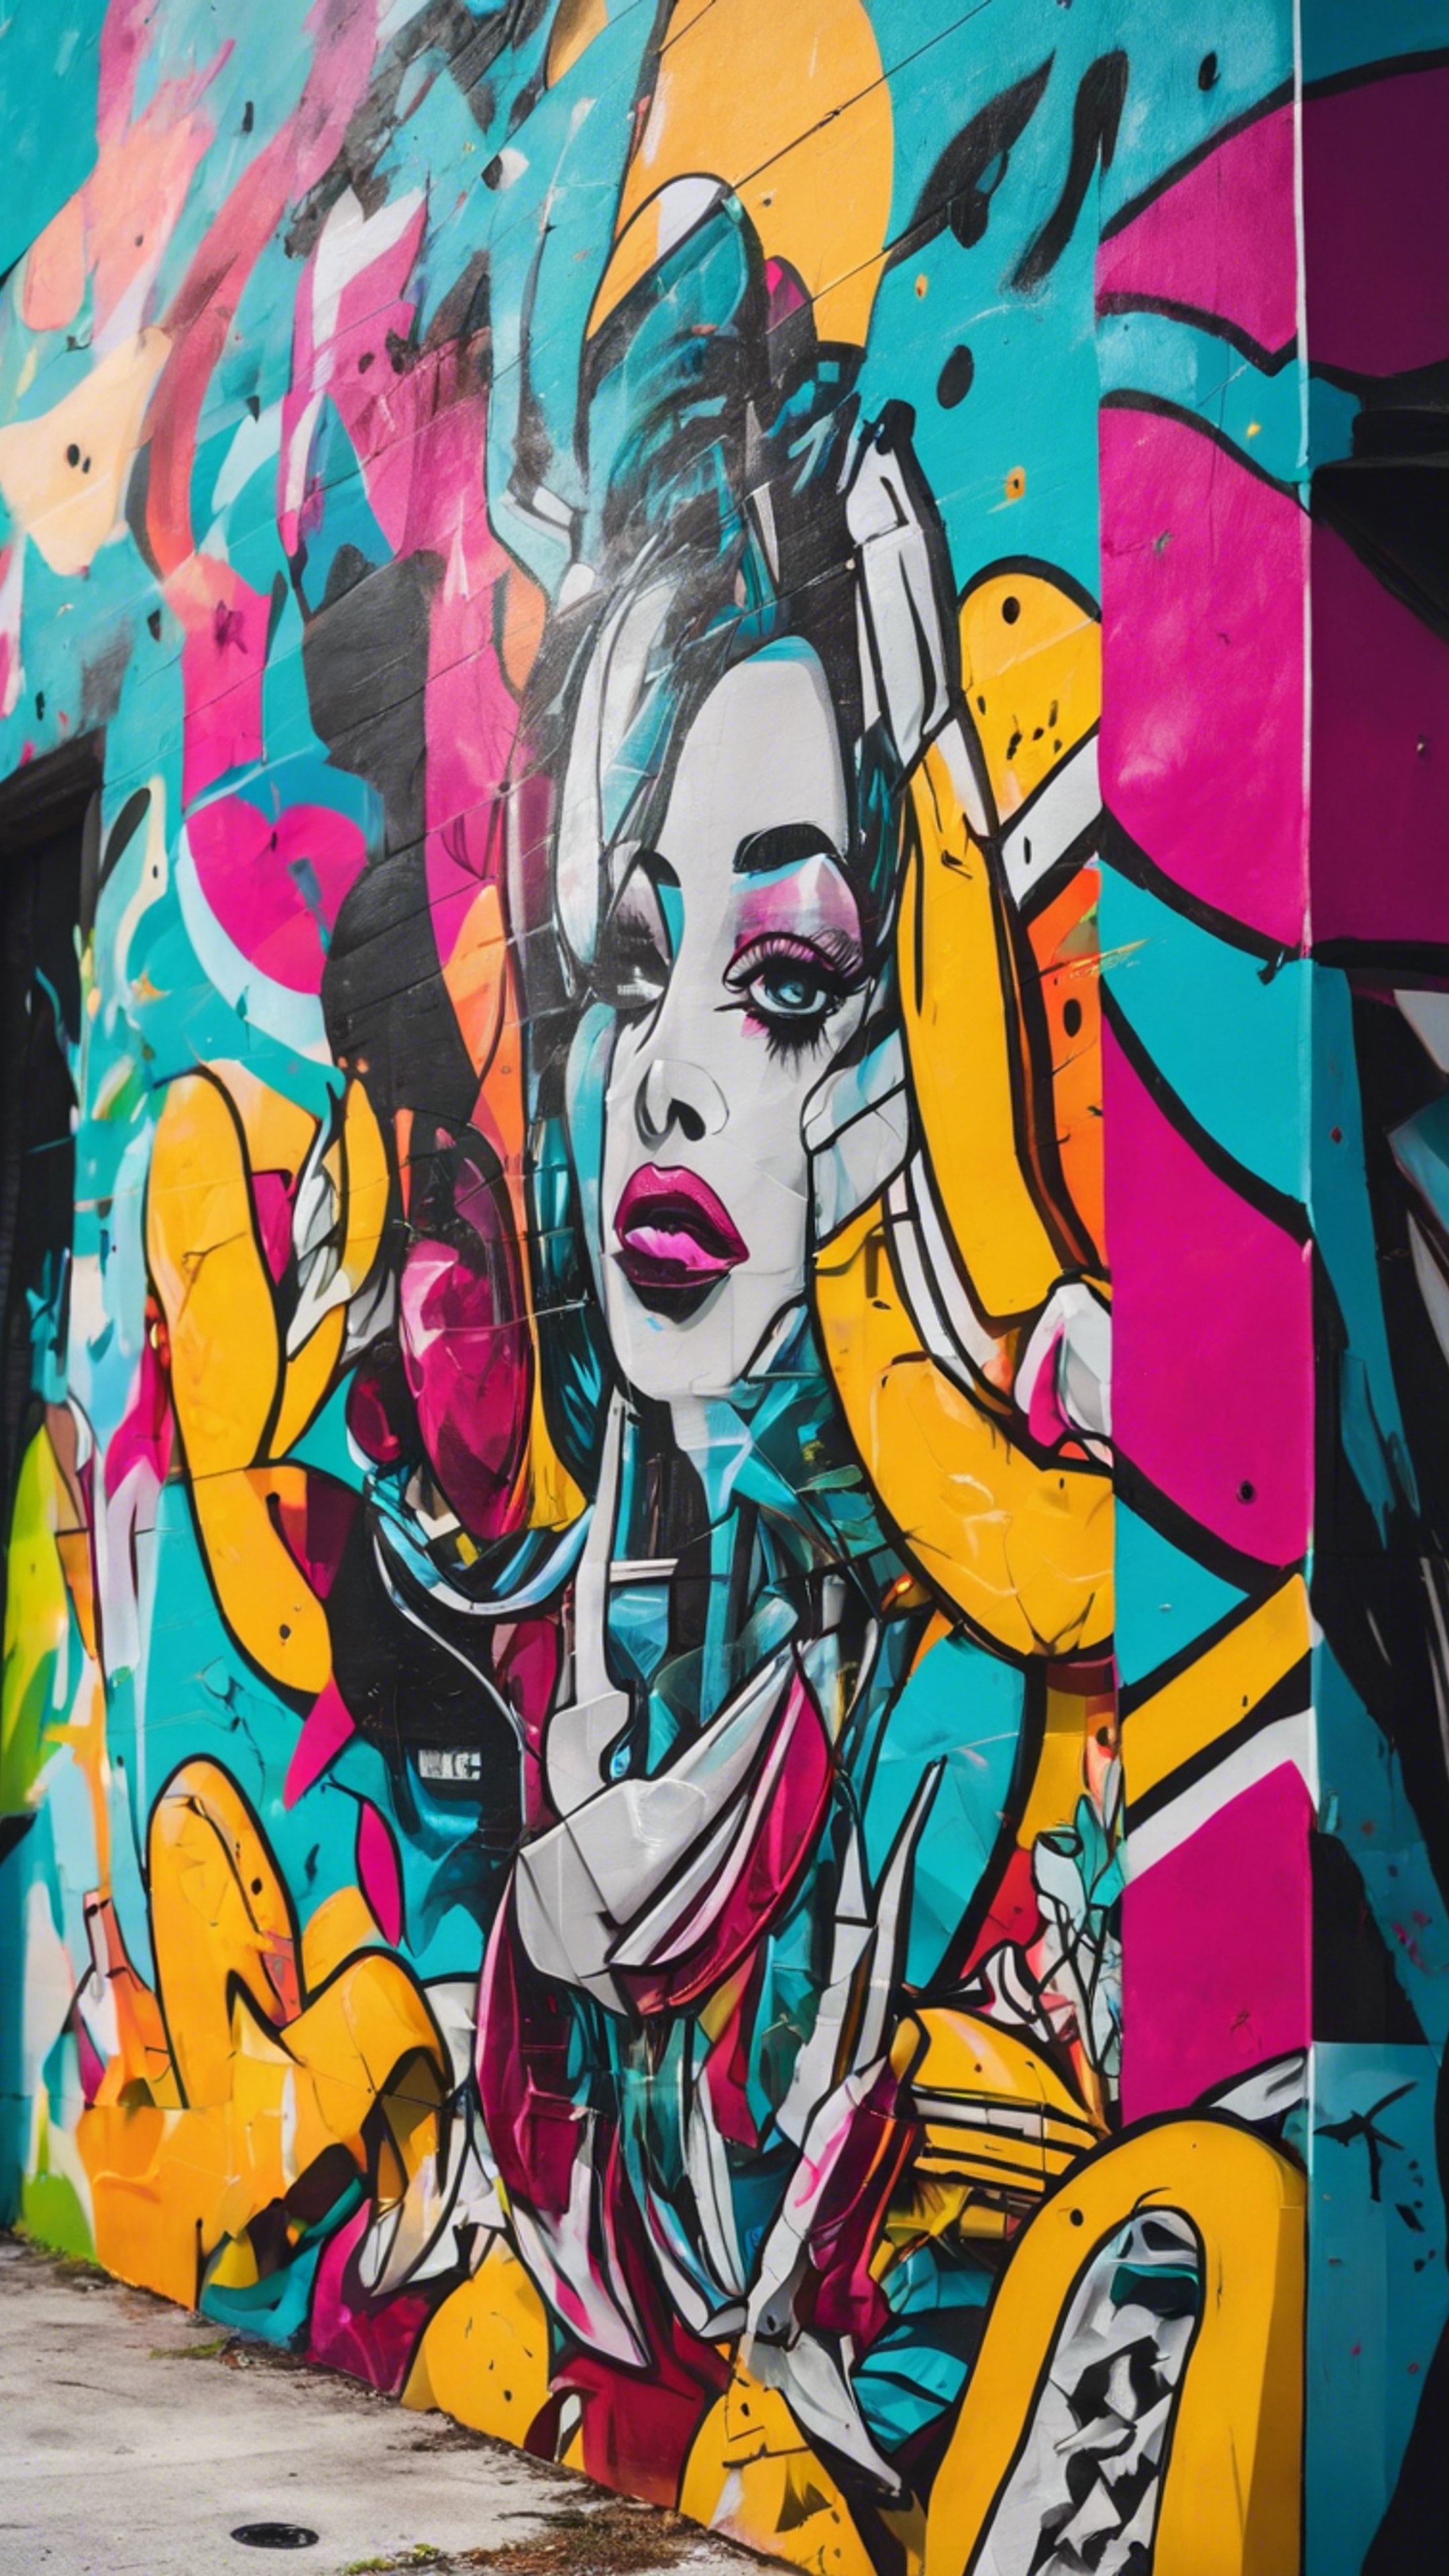 A vibrant street art mural in Wynwood, Miami, featuring abstract art and bright colors. Wallpaper[fc74442468964623923a]